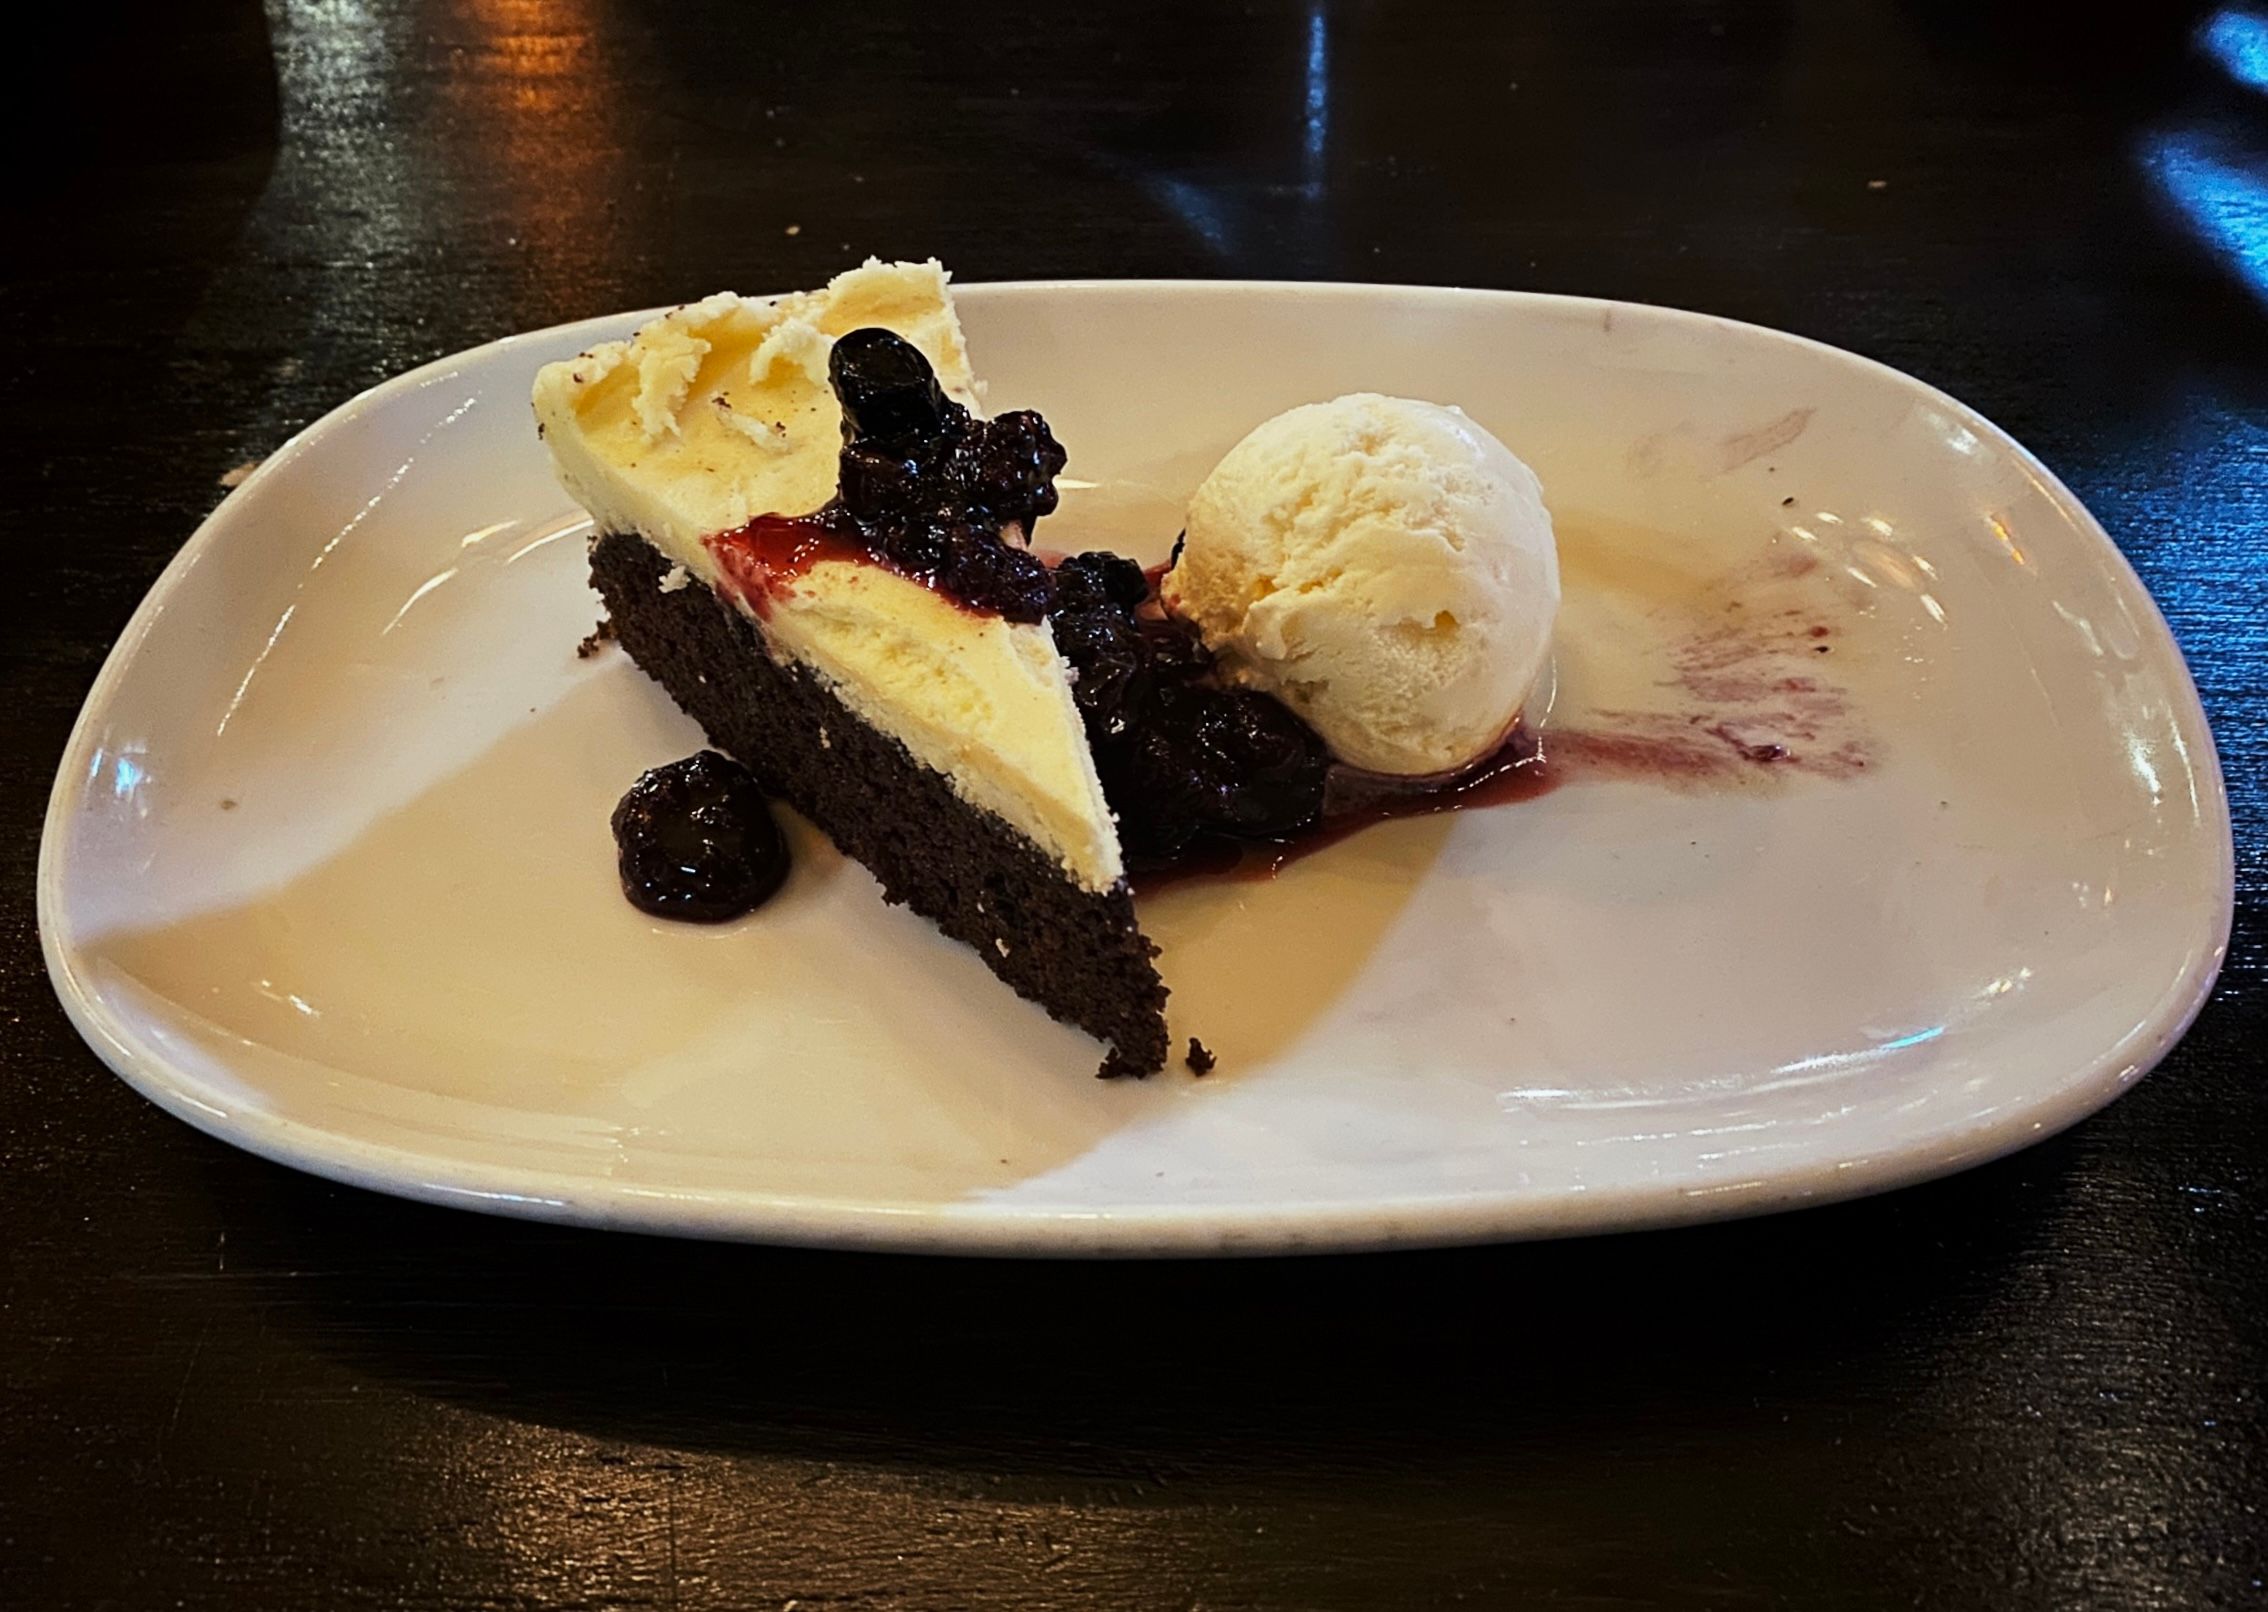 A photo of a slice of dark chocolate cake with white icing on top alongside some berries and a scoop of vanilla ice cream.